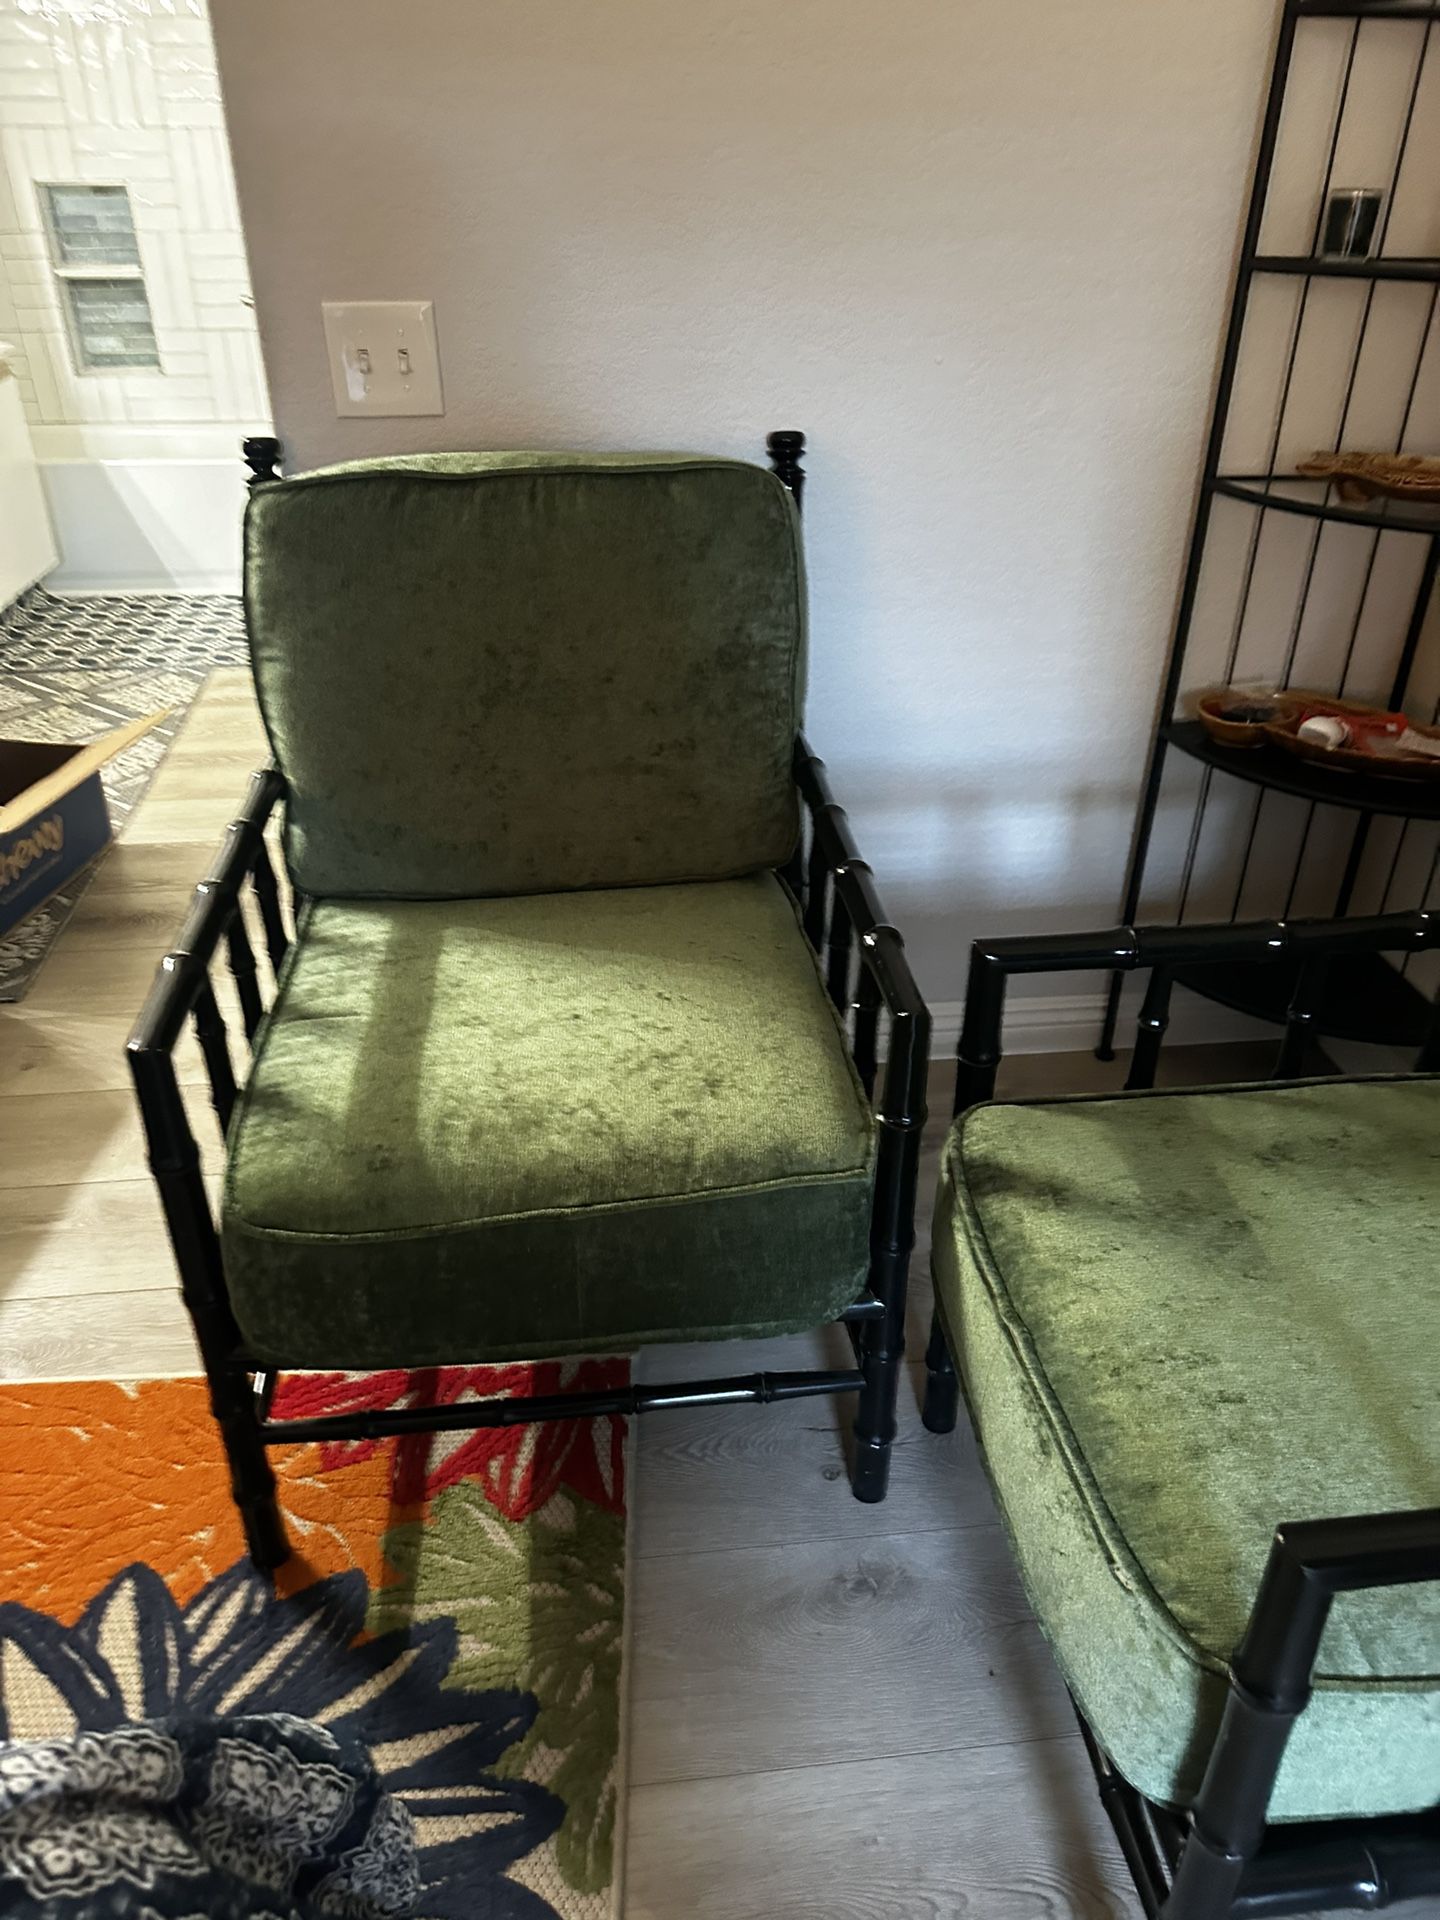 Two Black Rattan Chairs with Green Velvet Cushions